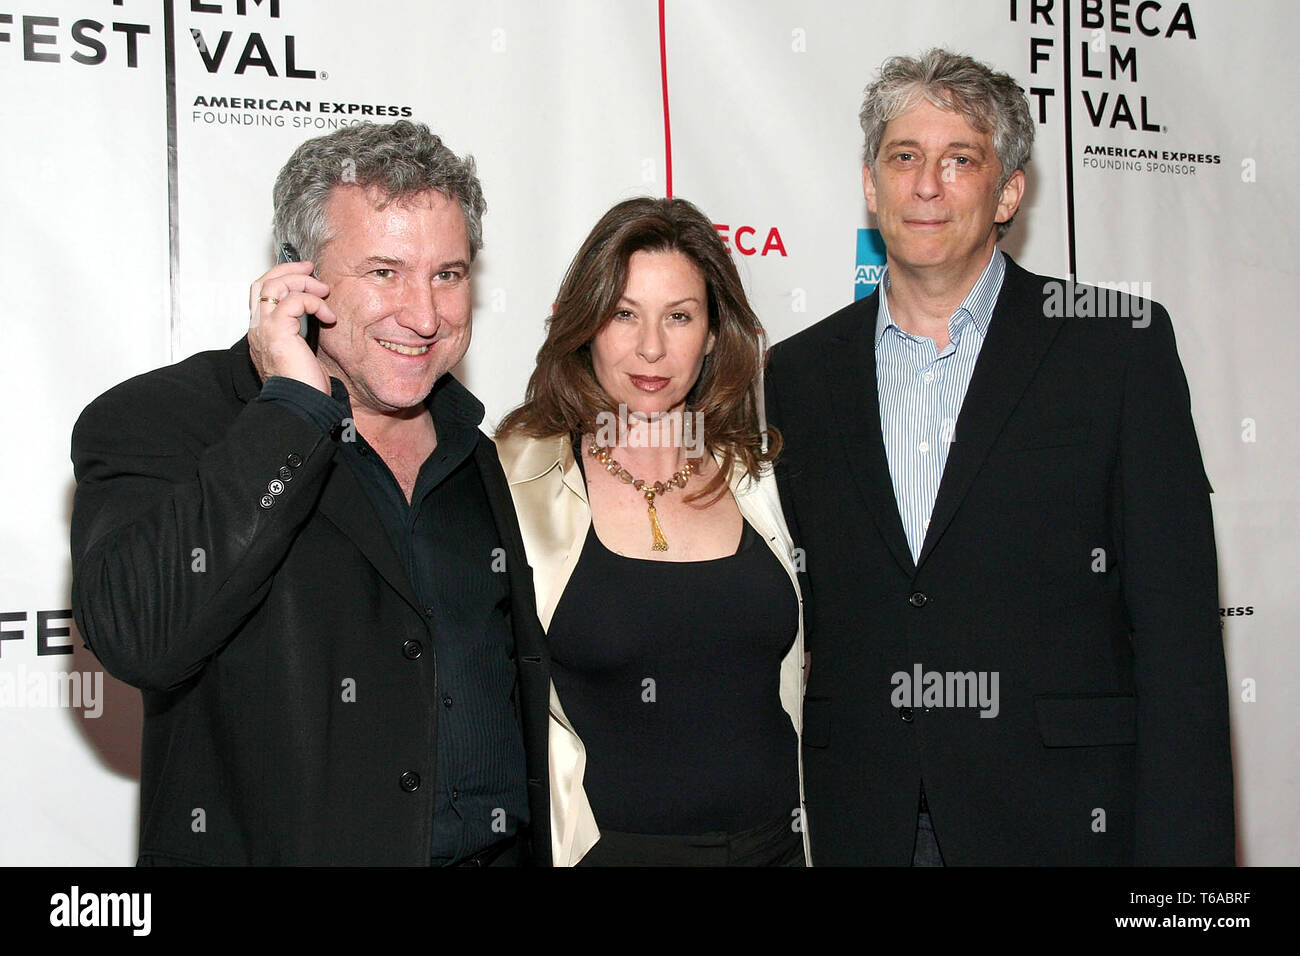 New York, USA. 30 Apr, 2007.  Kirk Shaw, Mary Aloe, Paul Schiff at the Tribeca Film Festival Premiere for the movie “Numb” at The Clearview Chelsea West on April 30, 2007 in New York, NY. Credit: Steve Mack/S.D. Mack Pictures/Alamy Stock Photo